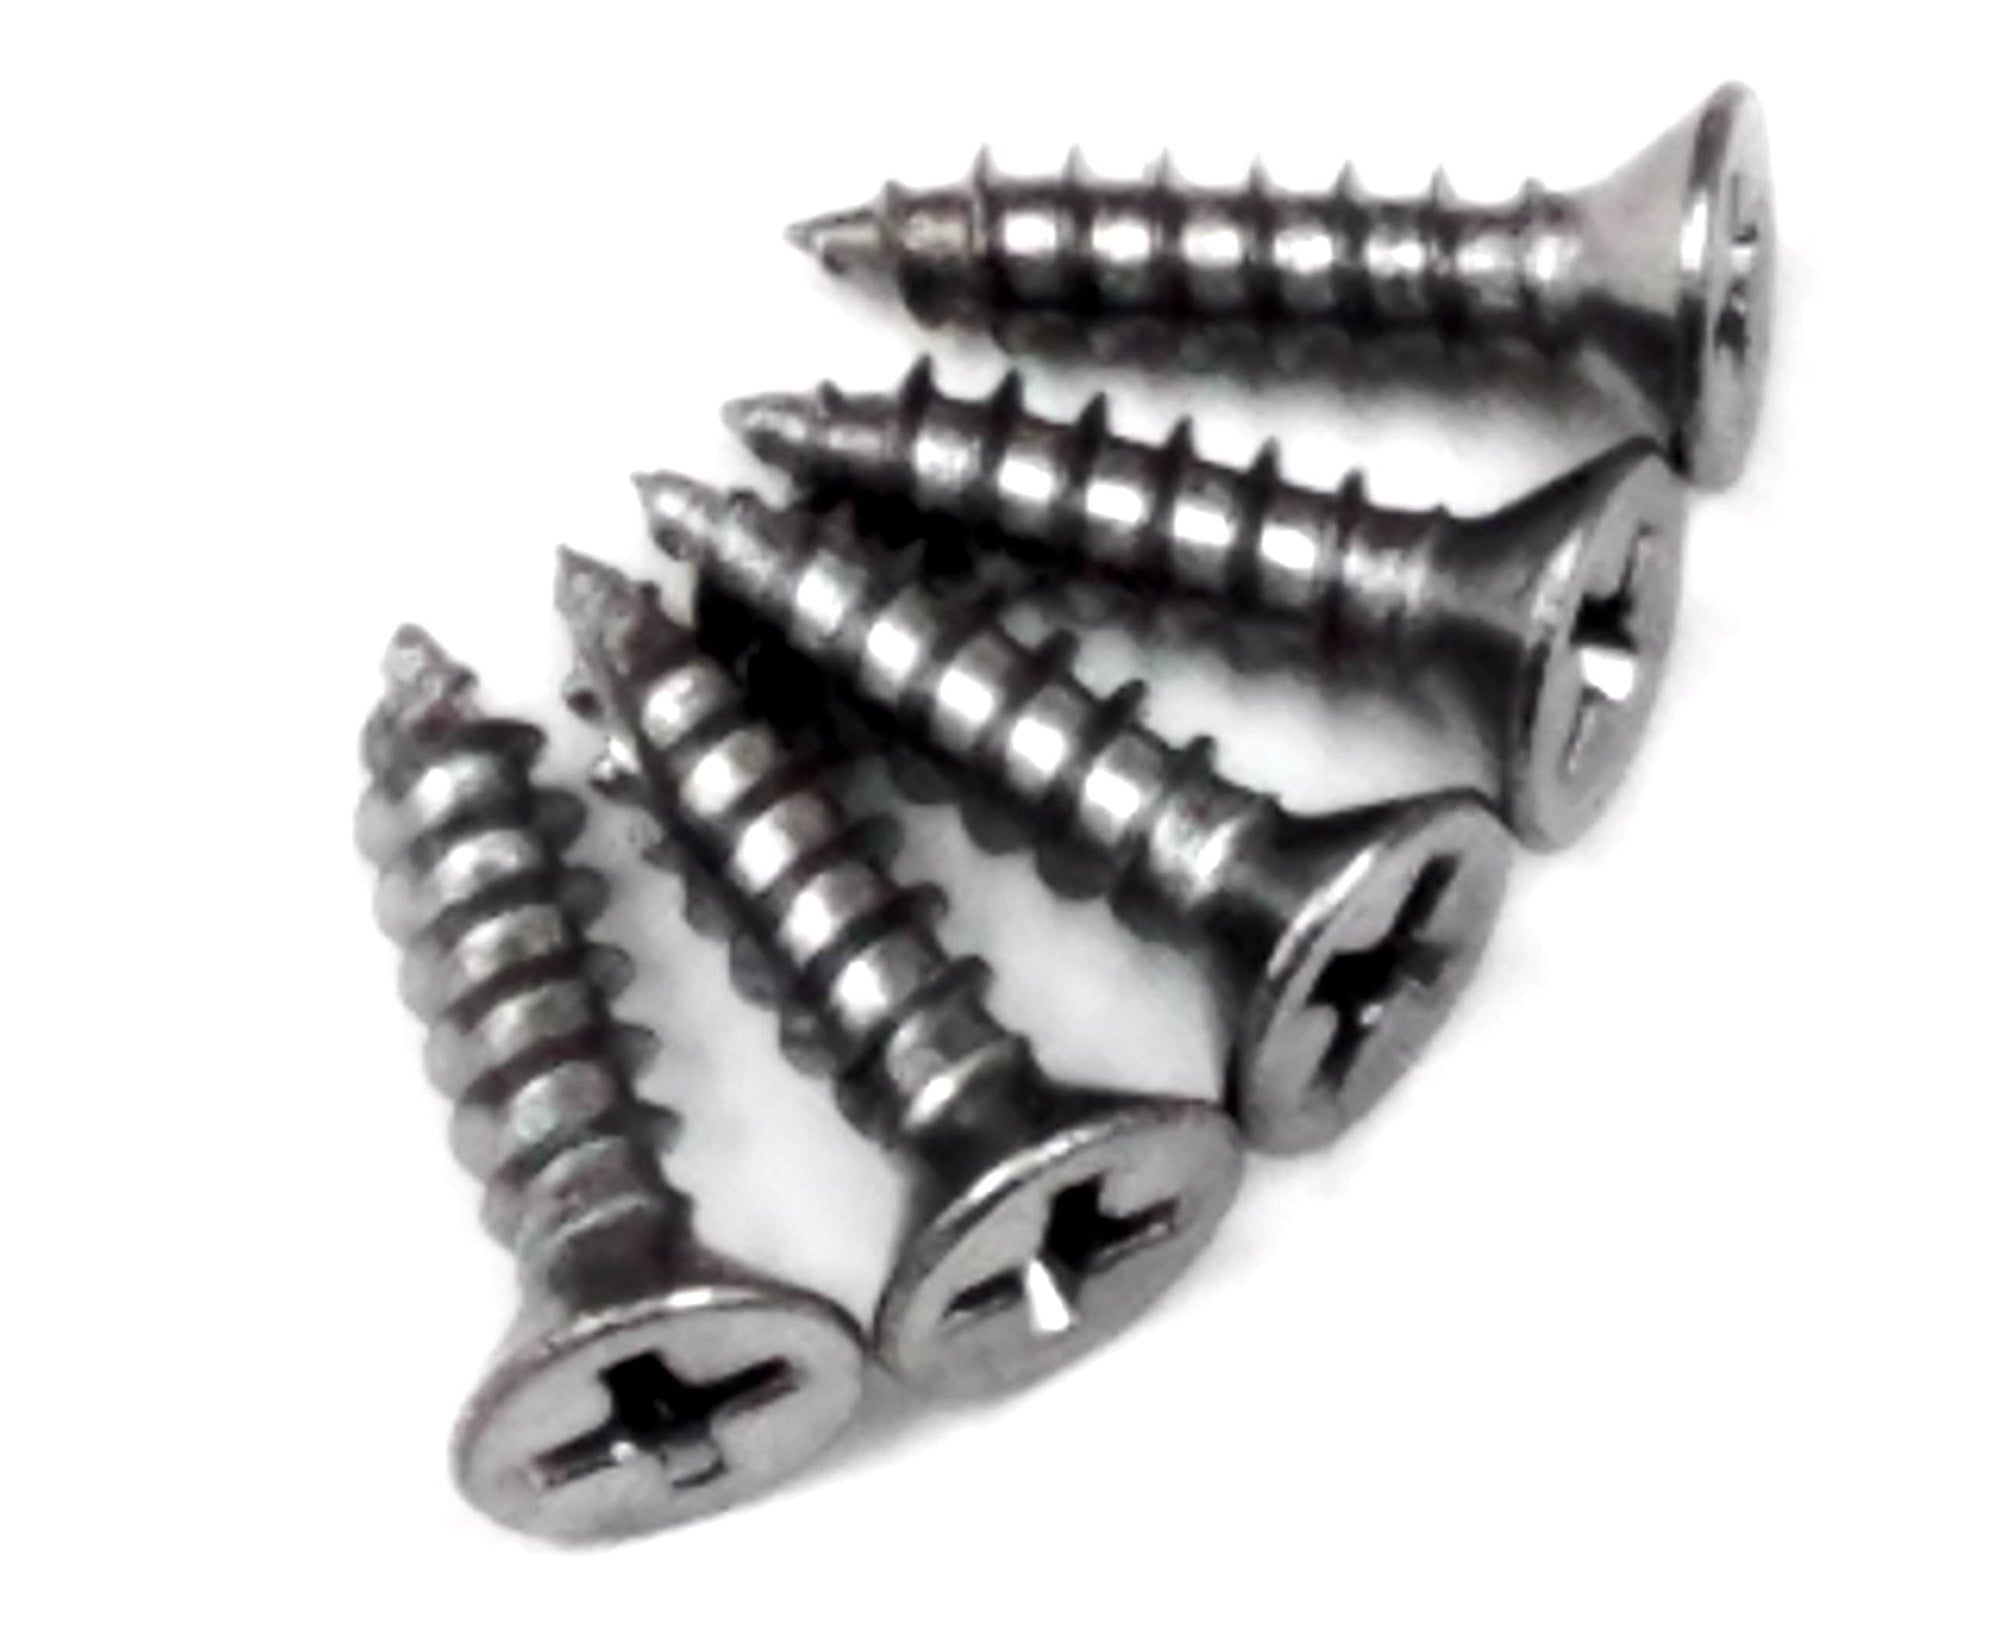 Fly Cut Wood Screws For Door Hinges - Satin Chrome - #9 X 3/4" Inch